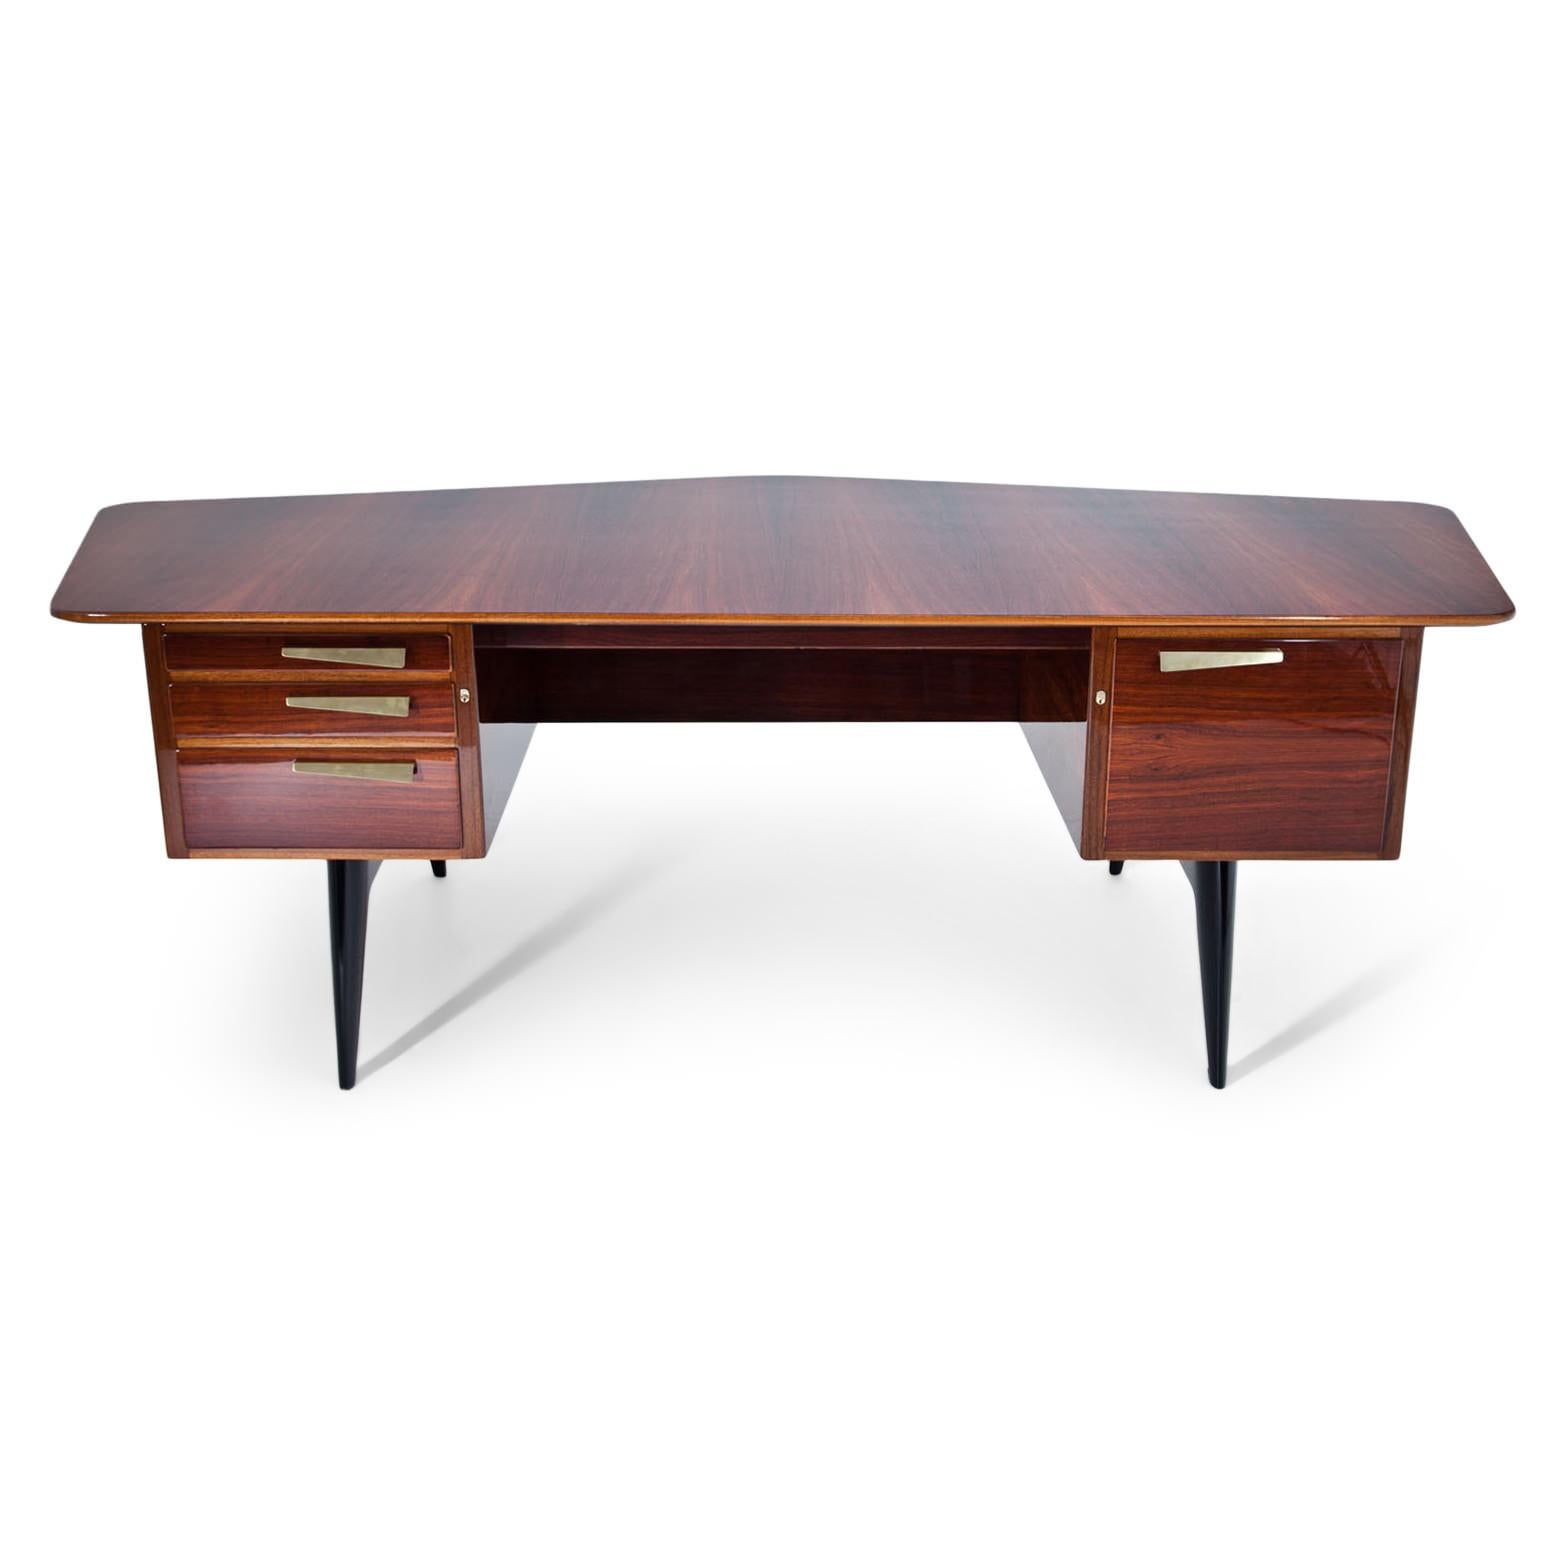 Scandinavian desk on black tapered legs, with four lockable drawers and a pentagonal large tabletop. The desk was designed for an all-round view. The desk is hand-polished and professionally refurbished. Label inside the second drawer.